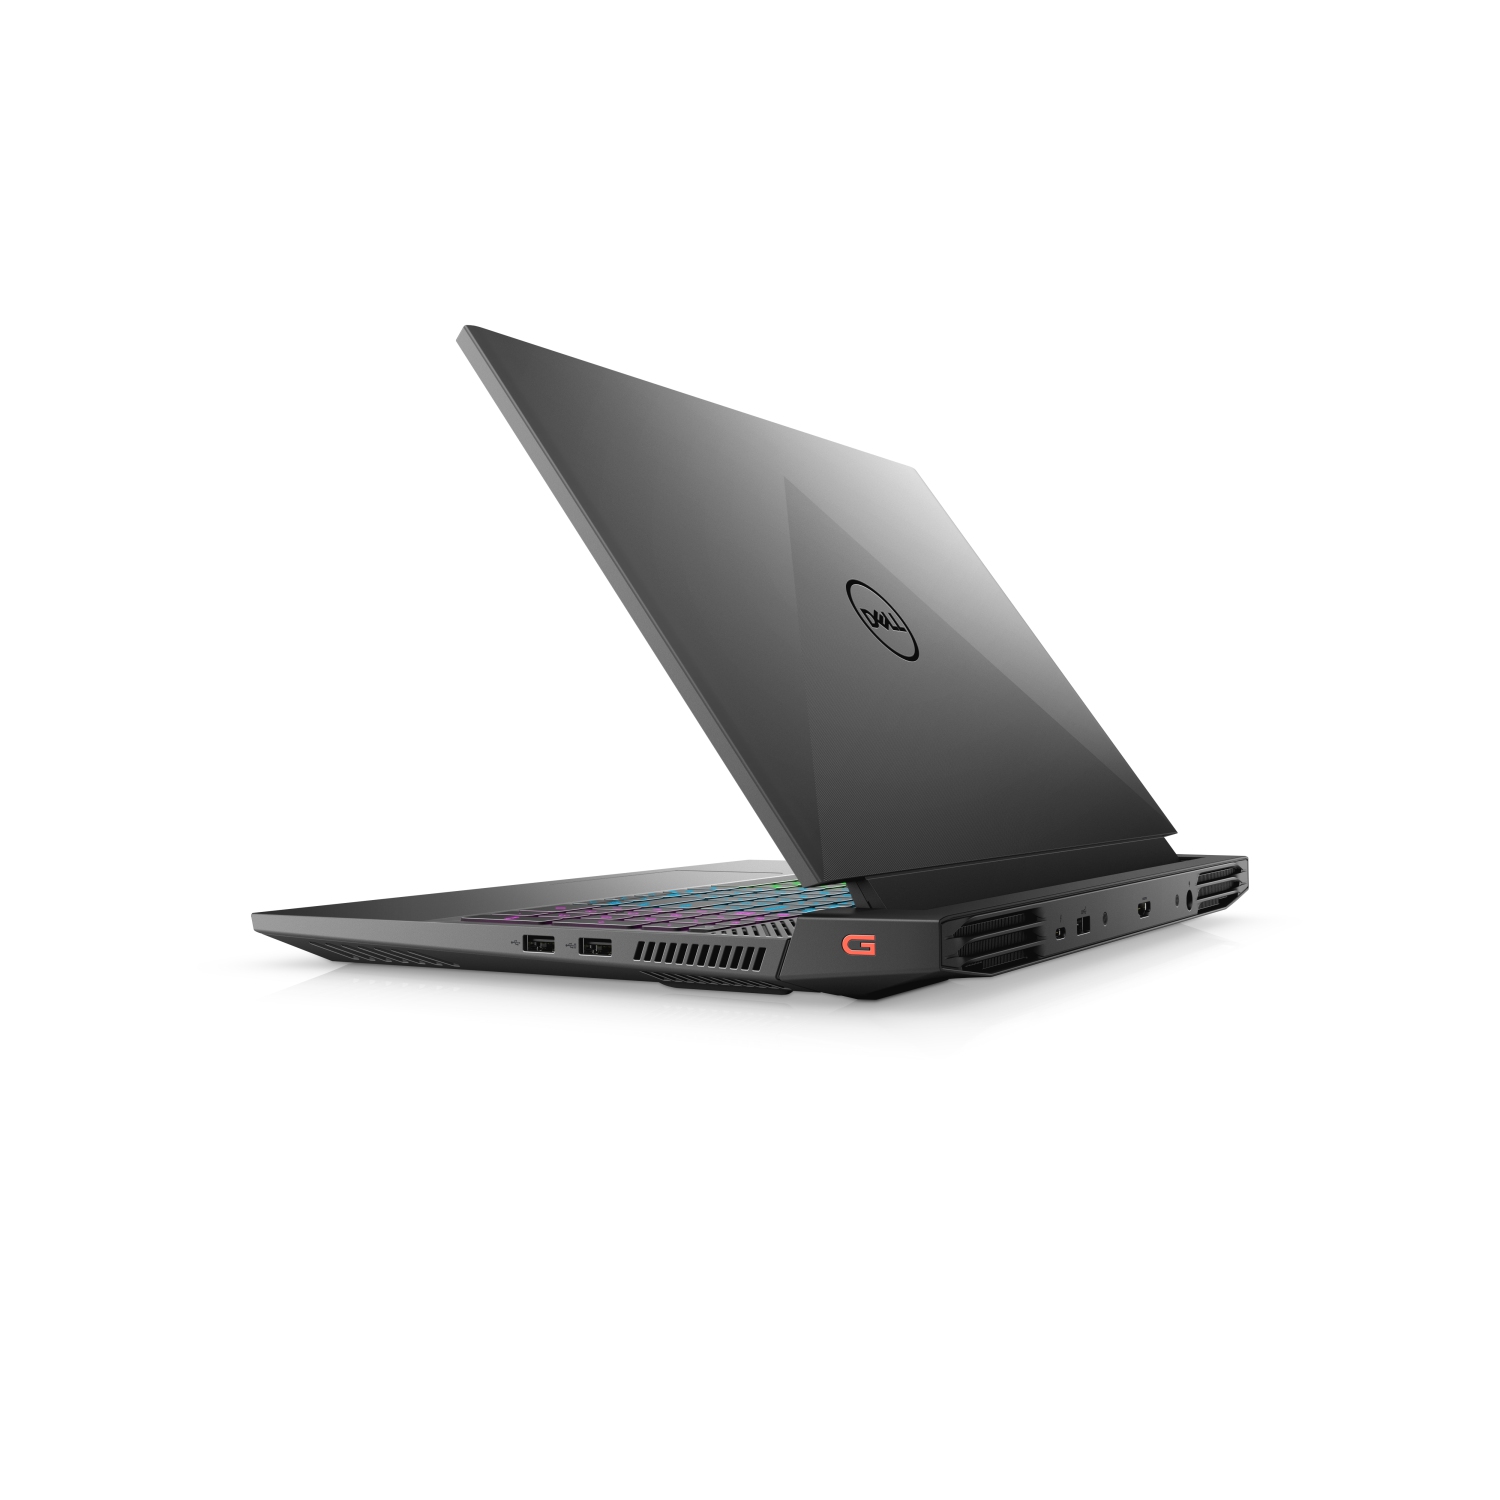 Refurbished (Excellent) – Dell G15 5511 Gaming Laptop (2021) | 15.6" FHD | Core i7 - 1TB SSD - 32GB RAM - RTX 3060 | 8 Cores @ 4.6 GHz - 11th Gen CPU - 6GB GDDR6